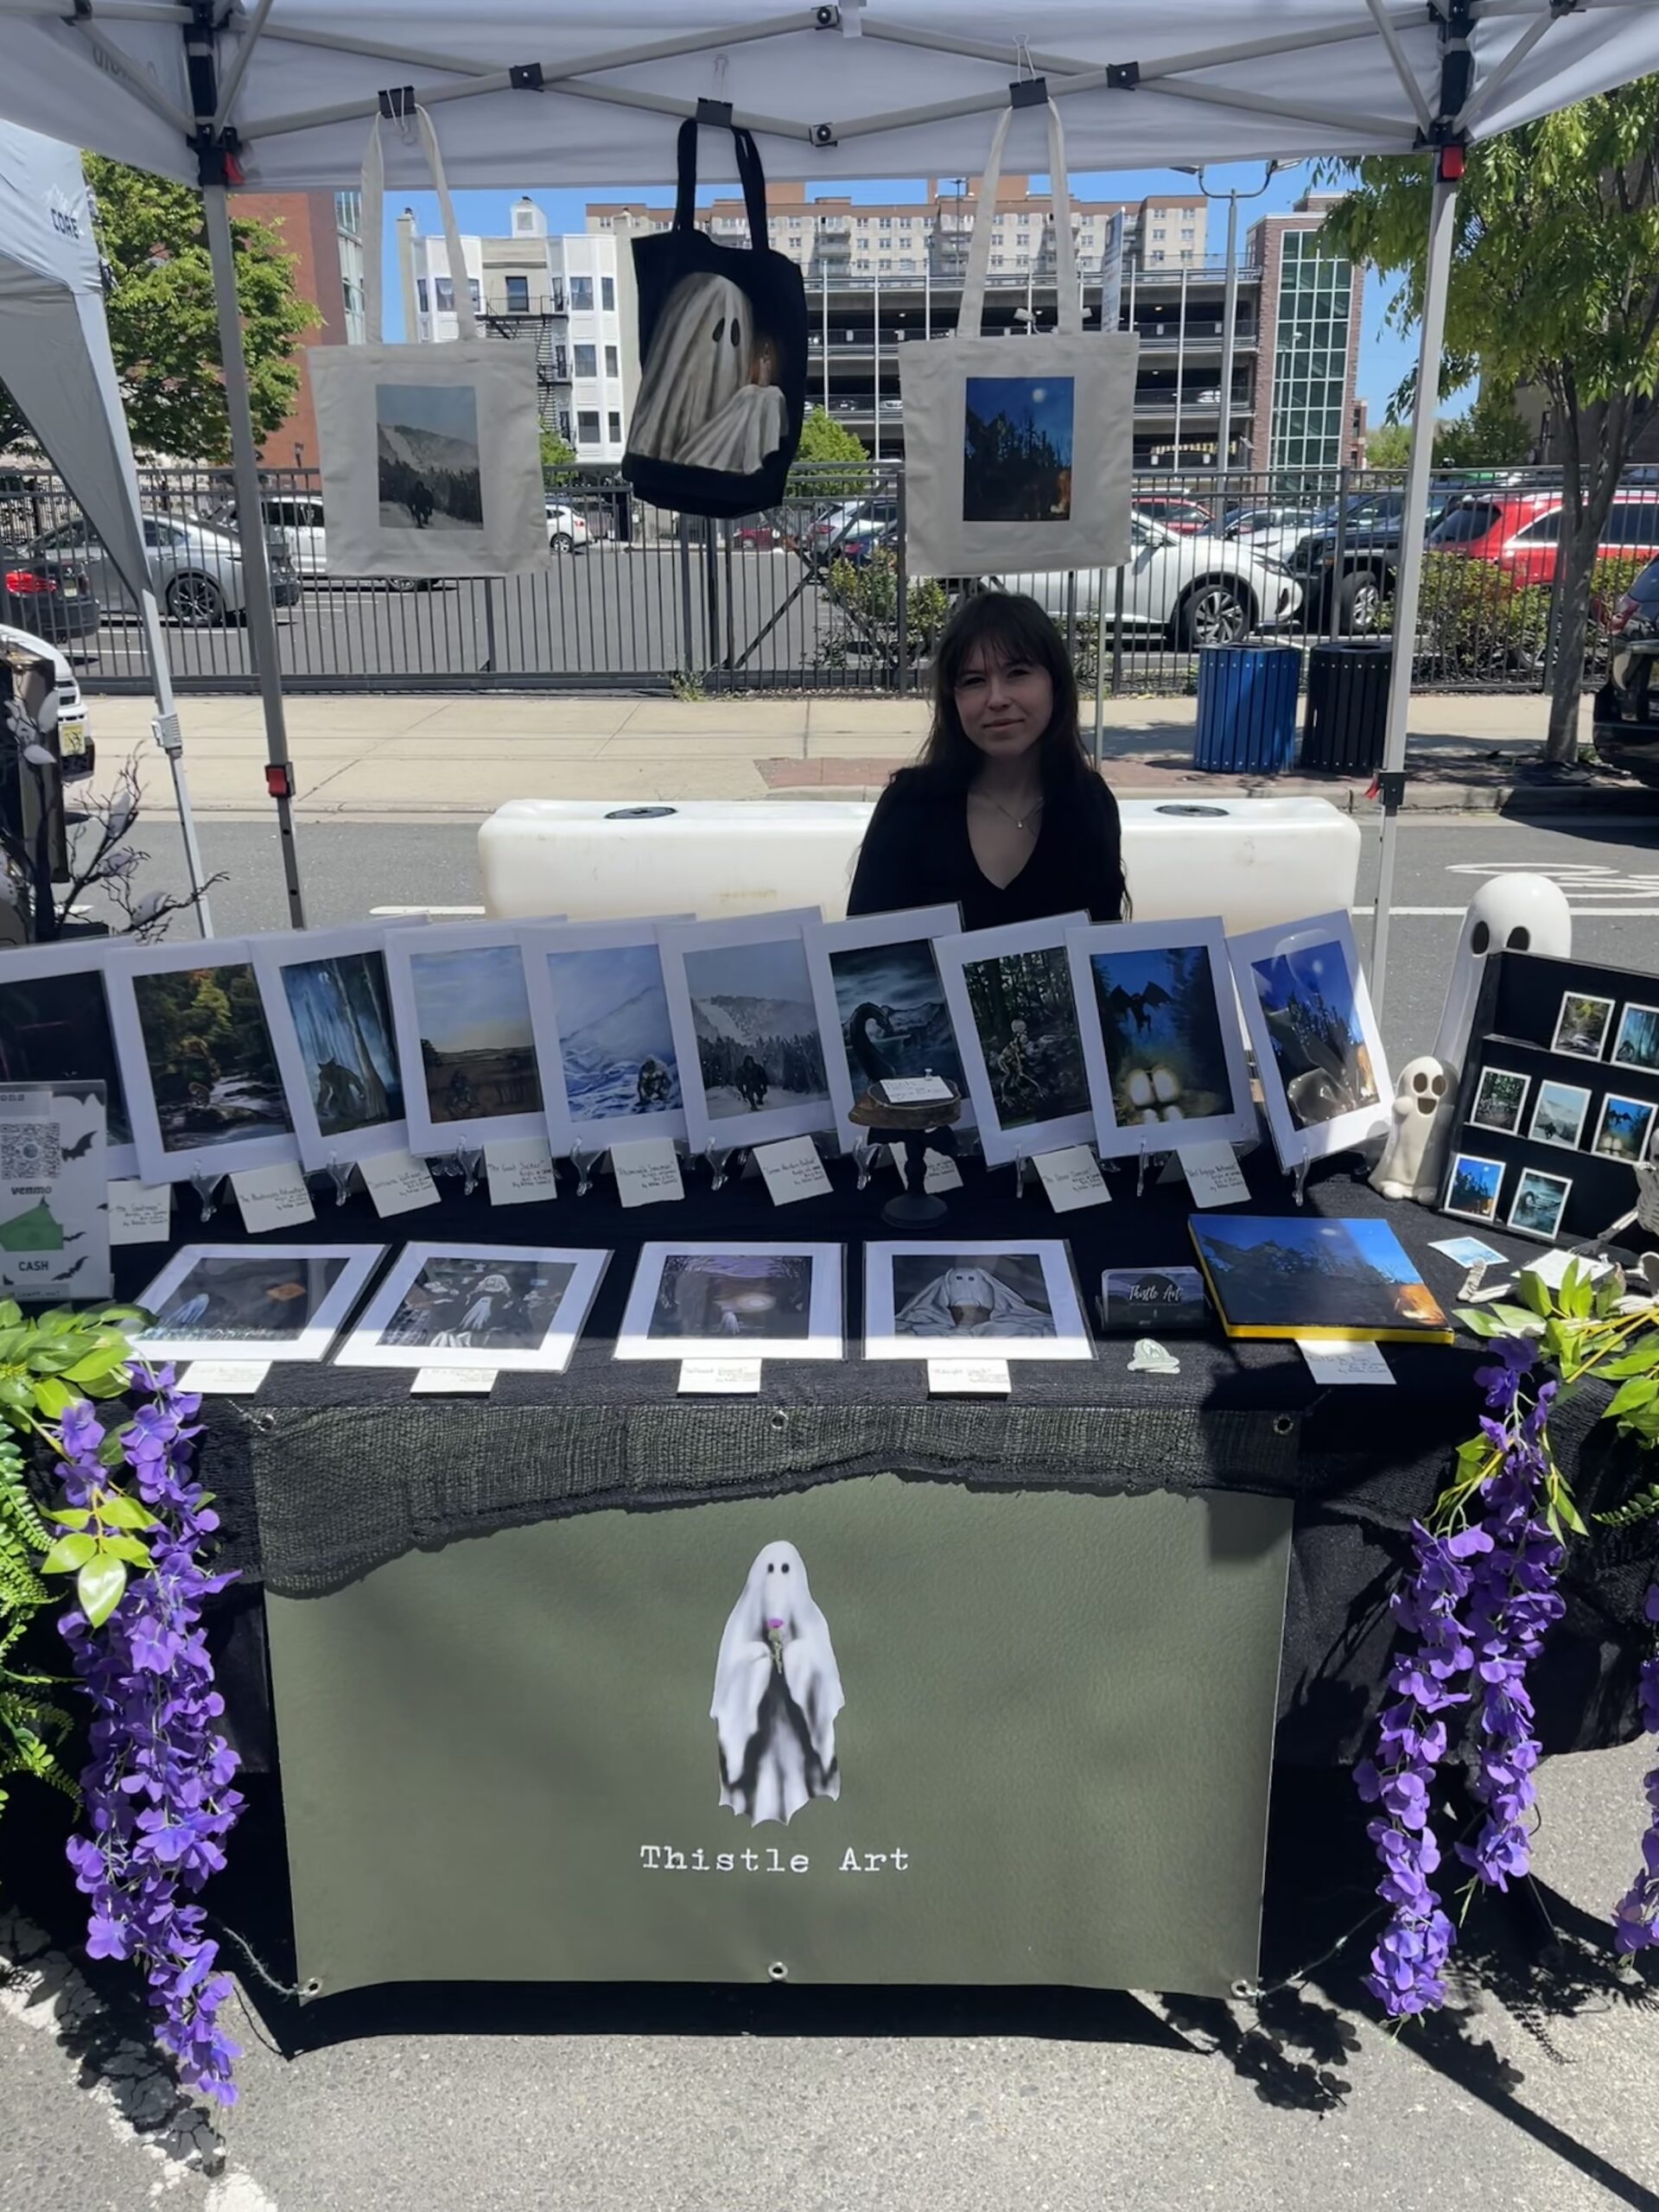 A woman is showcasing photographic art and other creative pieces at an open-air market stall, where you'll also find versatile items like tote bags beautifully displayed overhead.